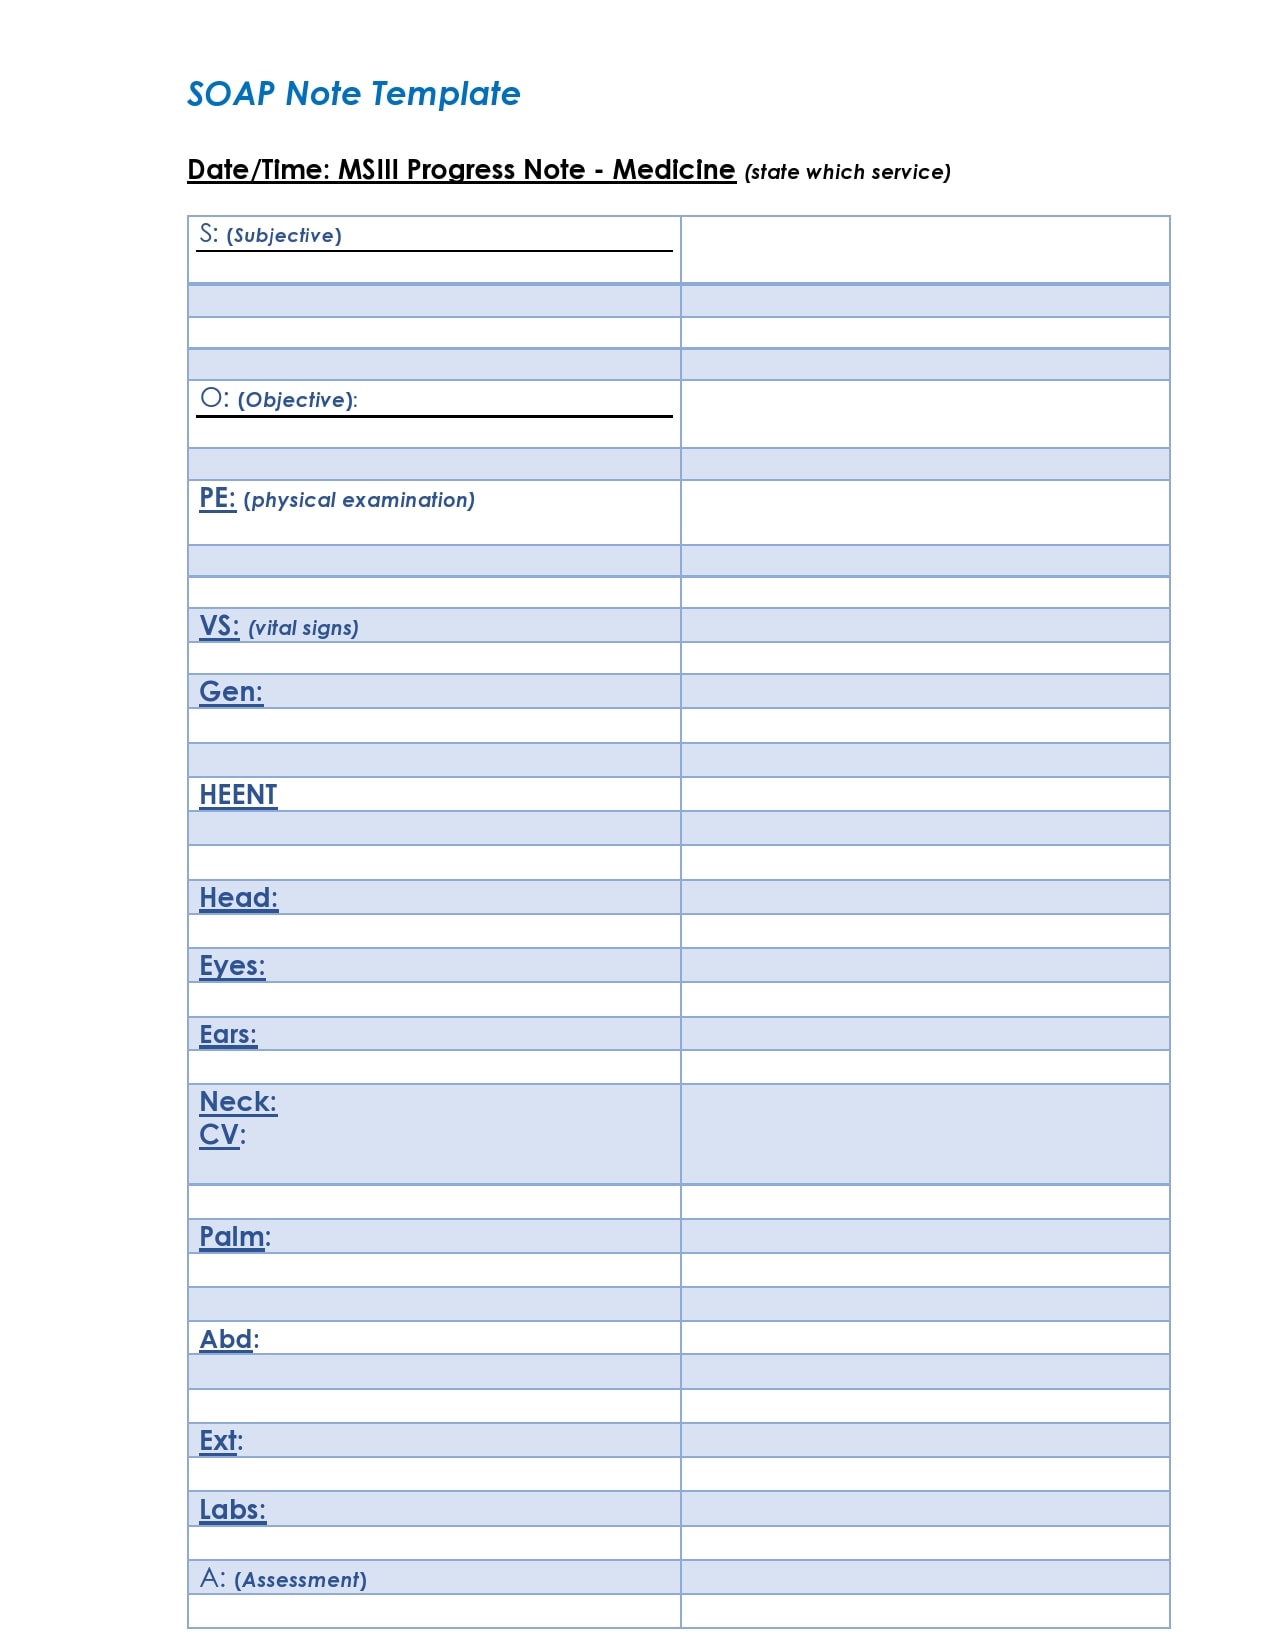 20 Blank SOAP Note Templates (+Examples) - TemplateArchive With Case Management Progress Note Template